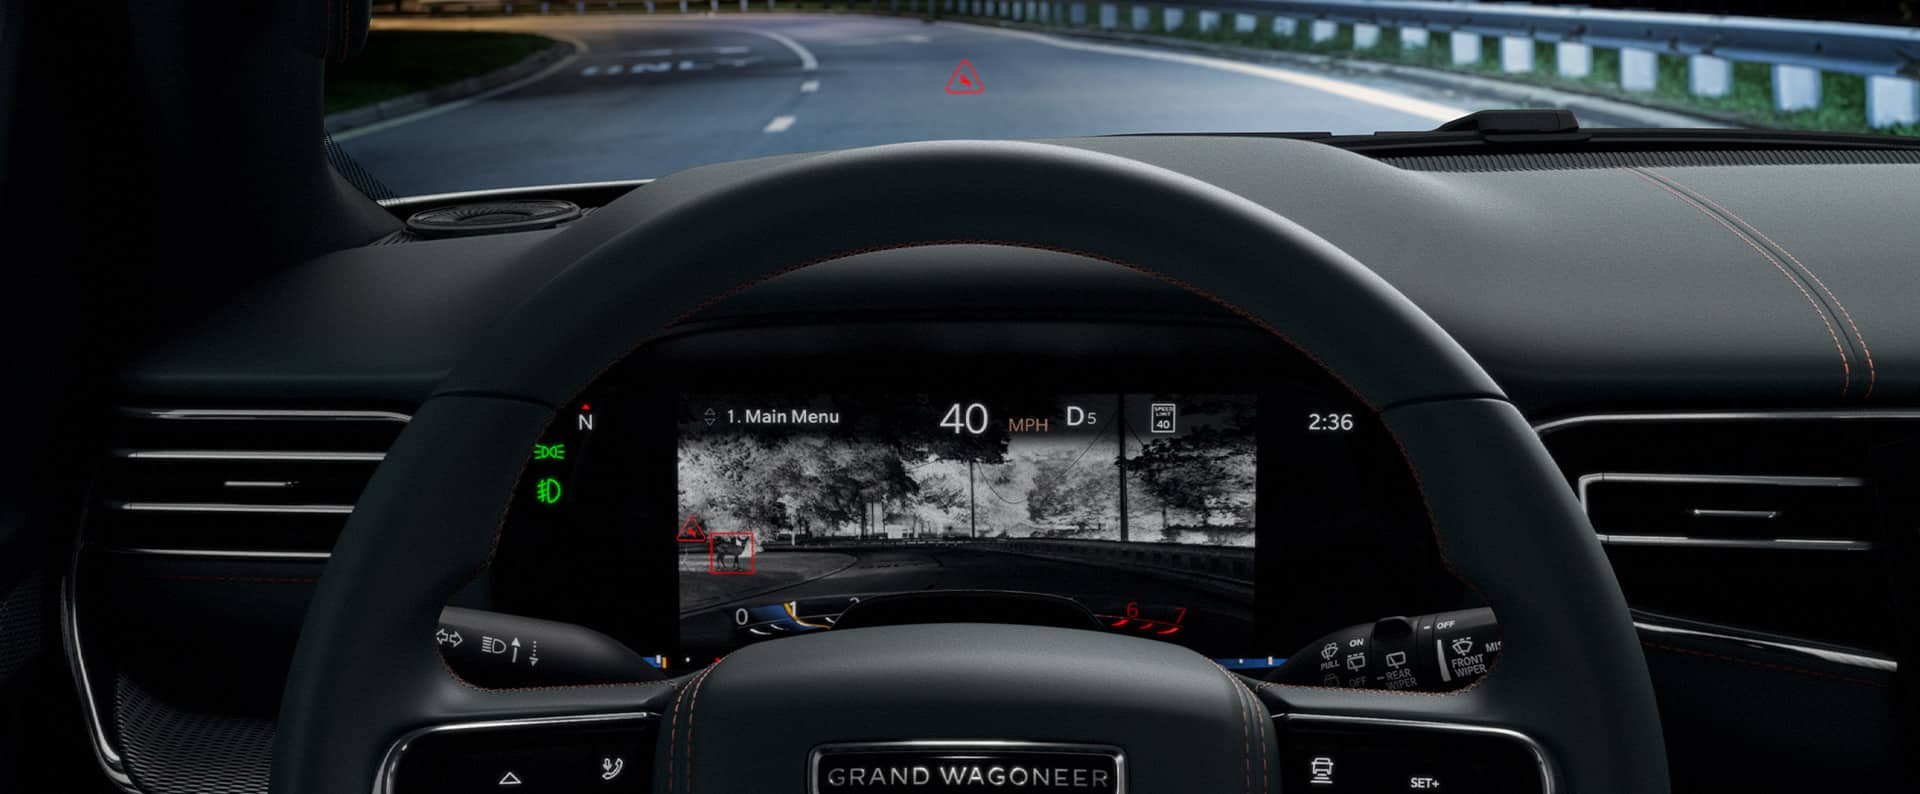 The Driver Information Digital Cluster display in the 2022 Grand Wagoneer showing the night vision camera view of the road ahead with a deer at the side of the road highlighted in red.